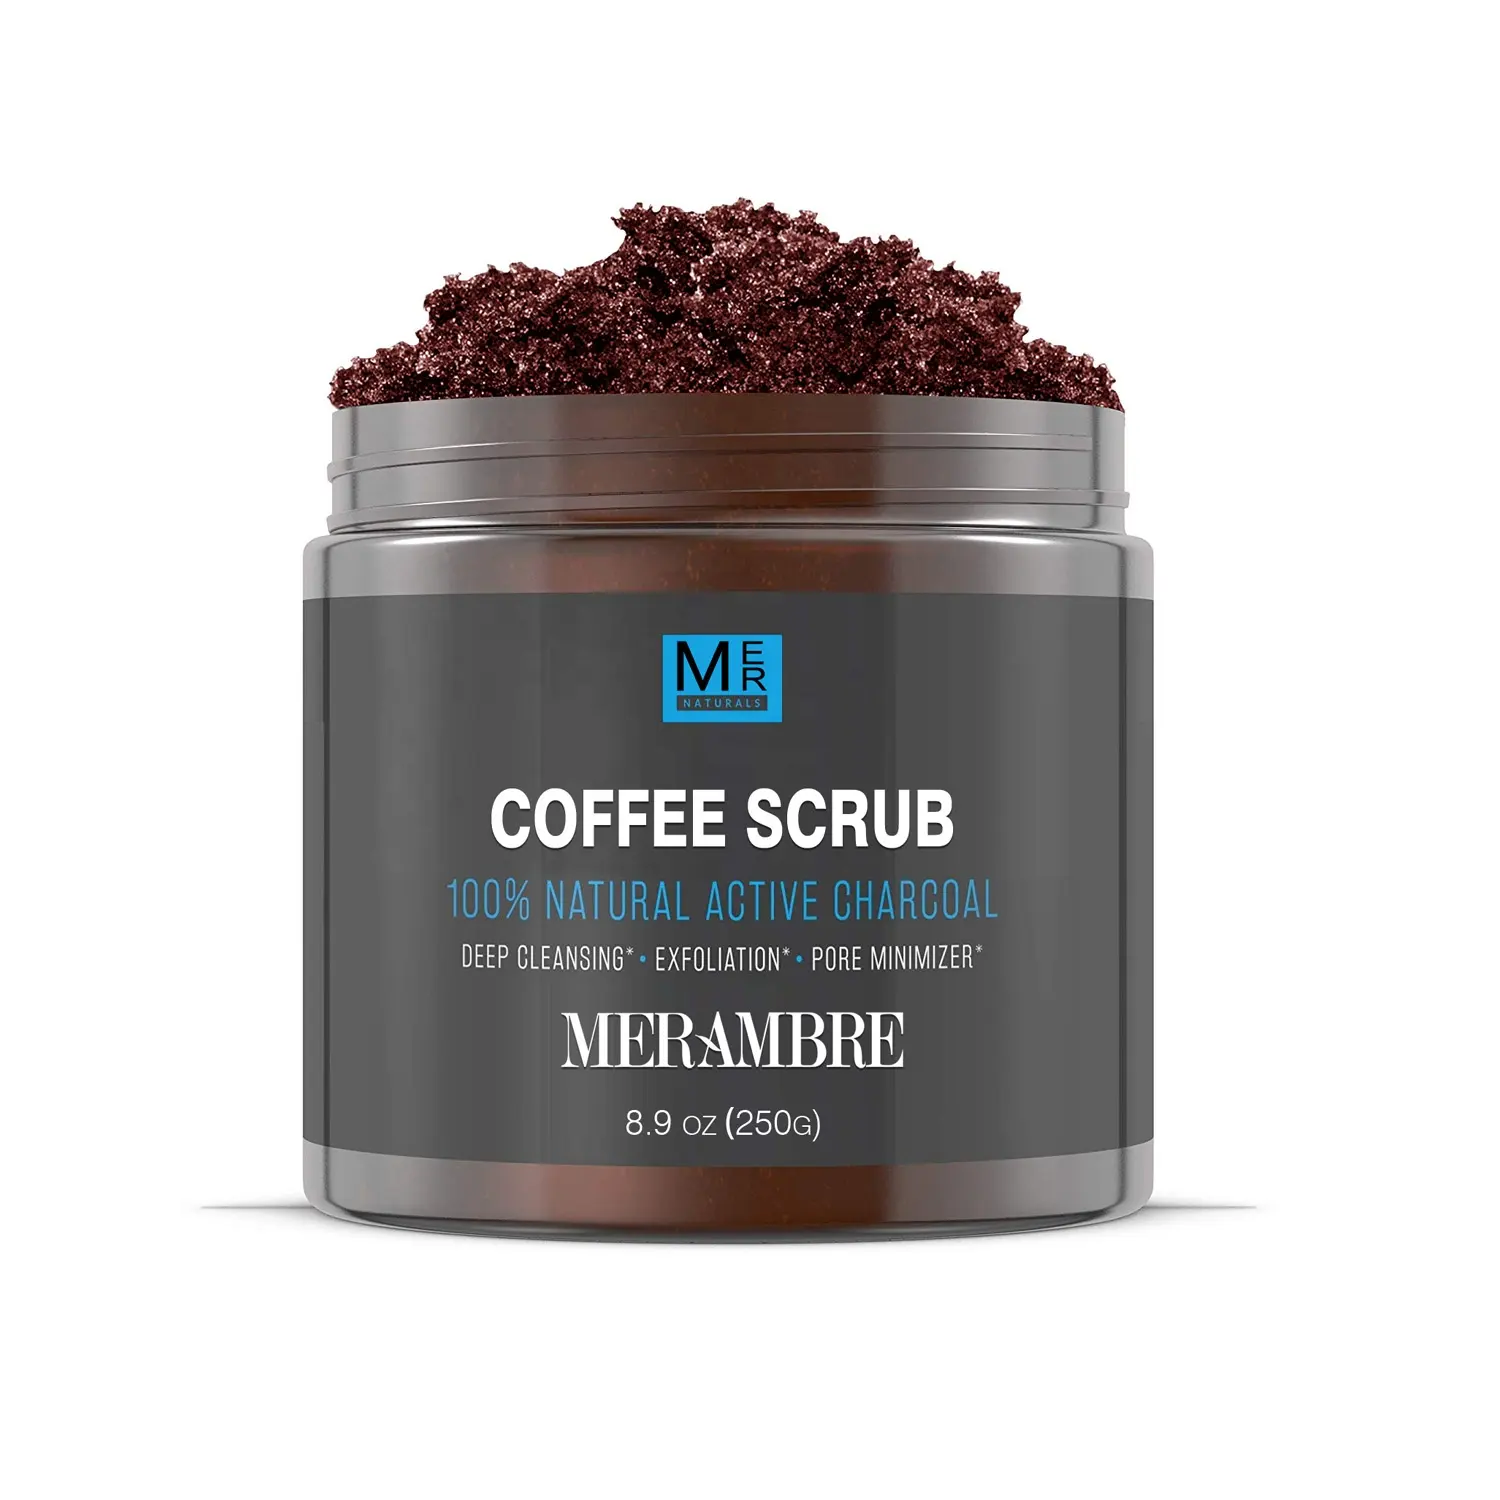 Coffee Scrub All Natural Coconut Shea Butter Best Anti Cellulite Stretch Mark Treatment Spider Vein Therapy Varicose Veins